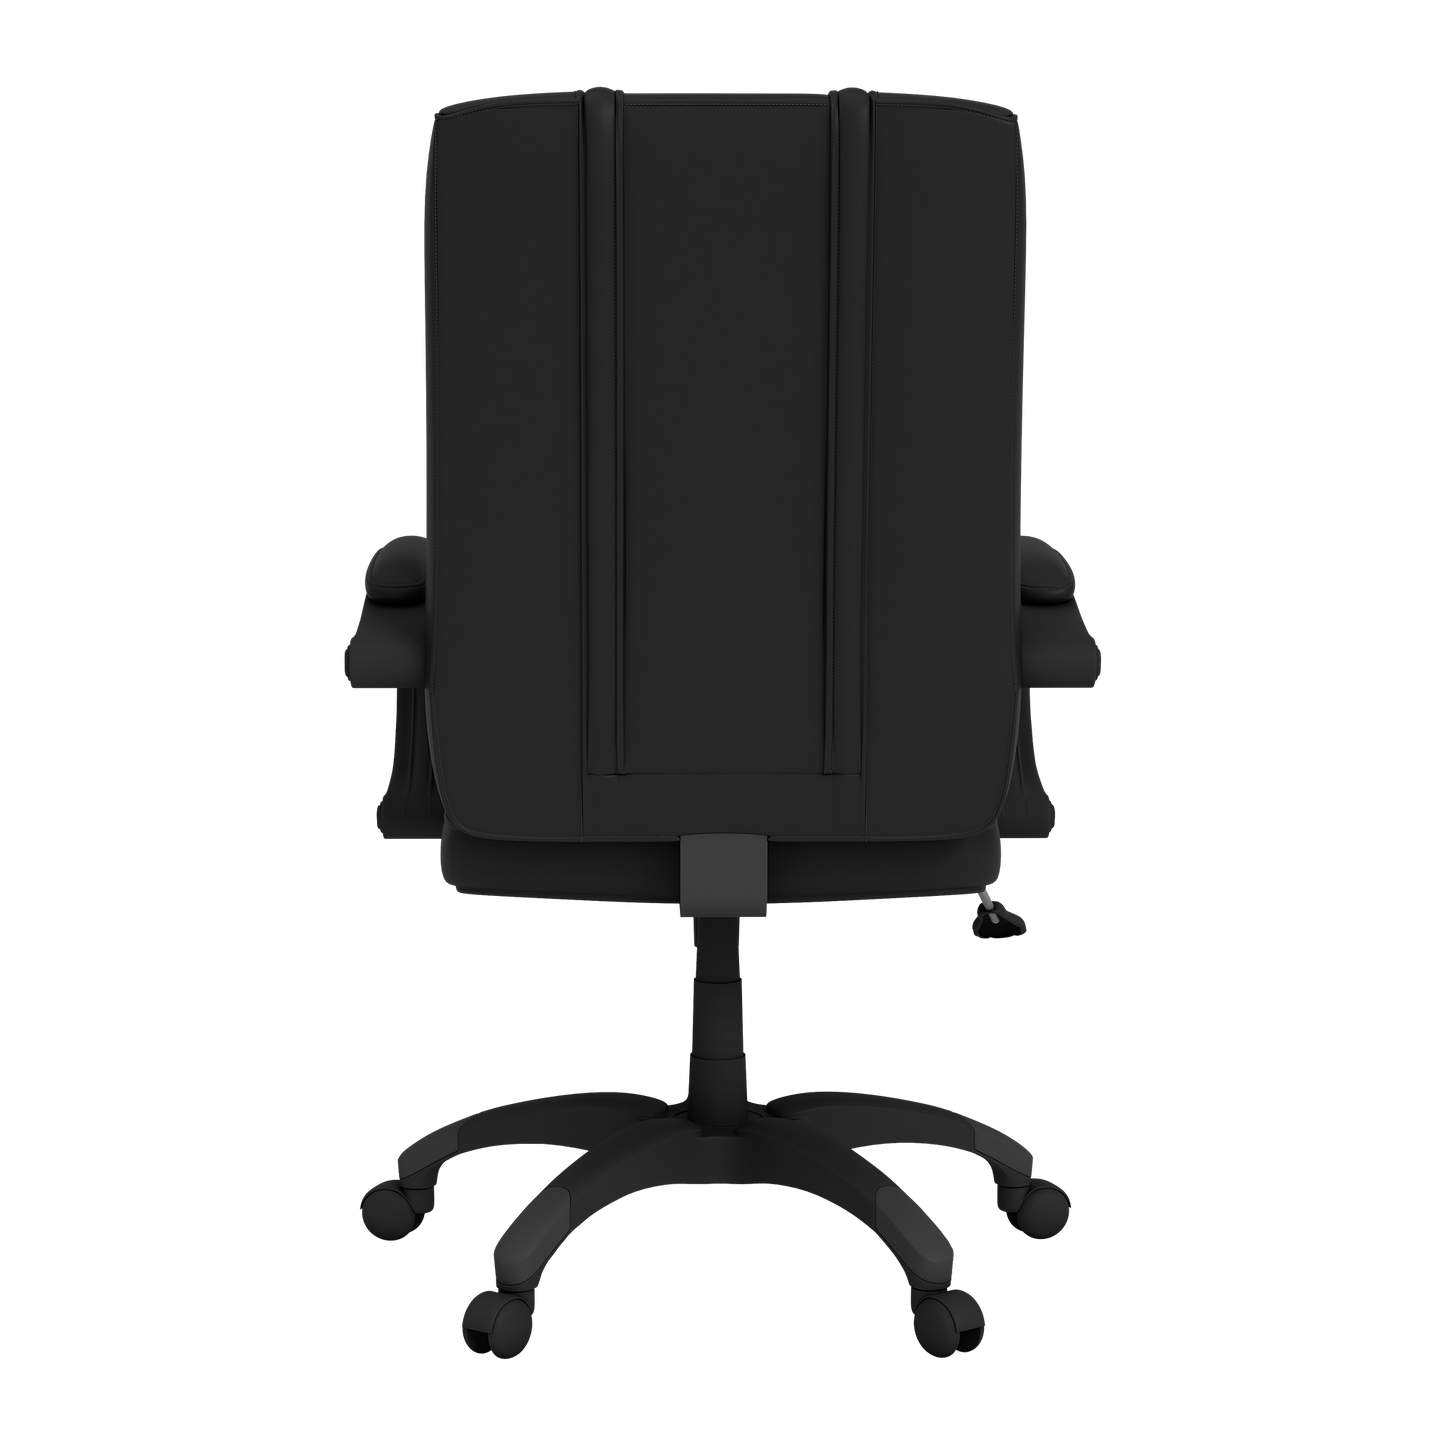 Office Chair 1000 with Father's Day Tie Logo Panel